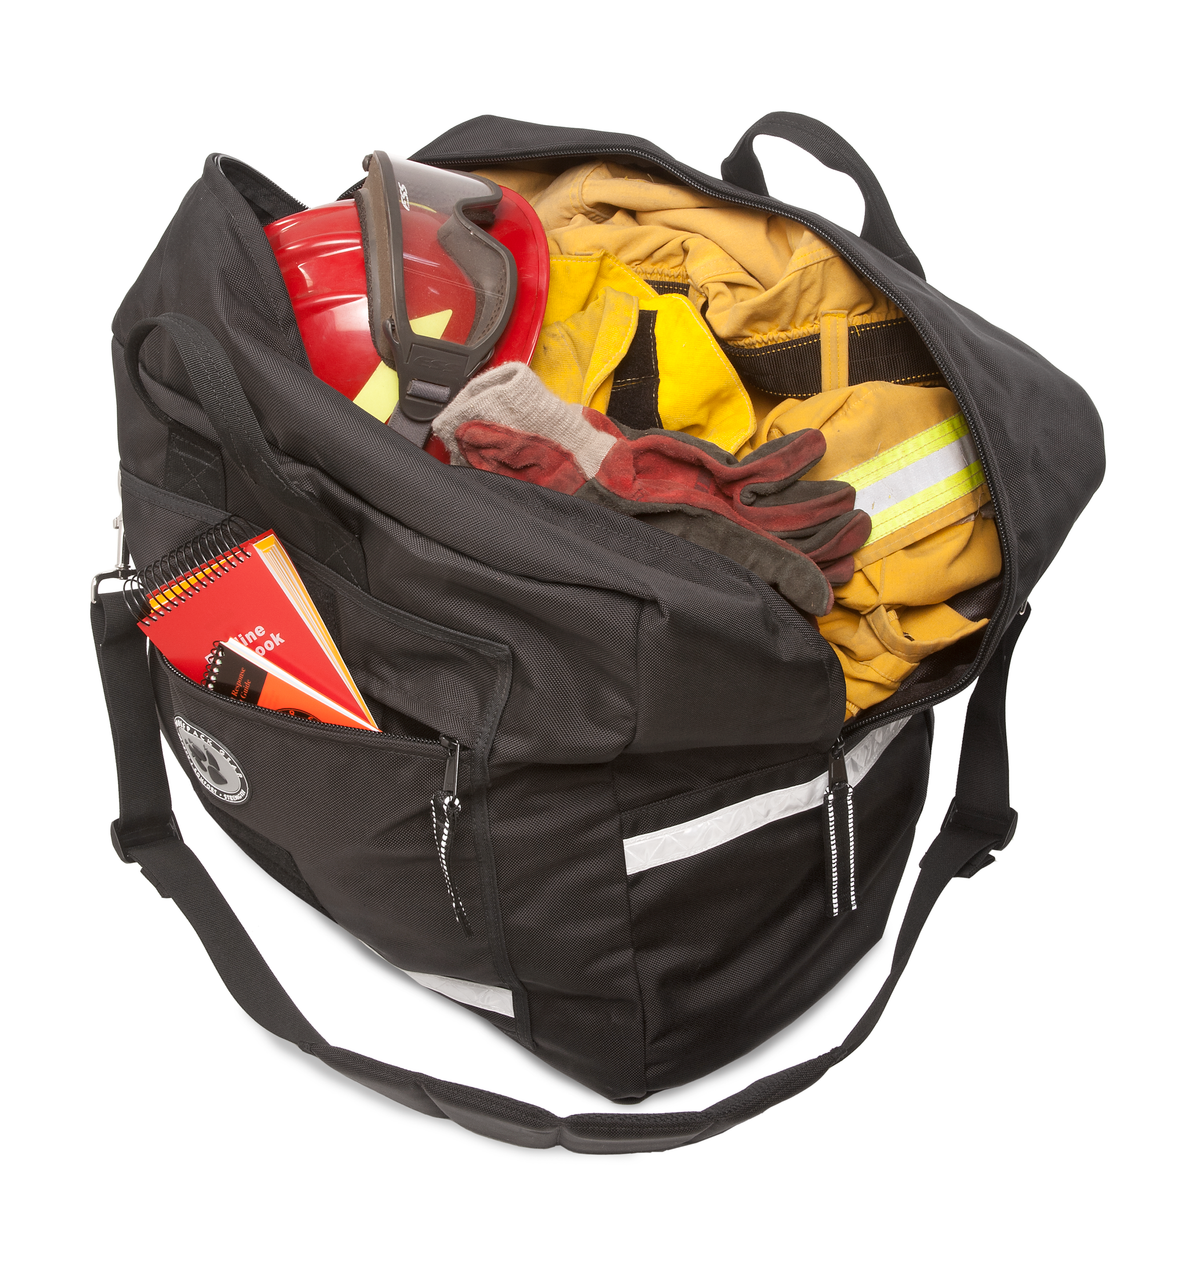 Wolfpack PPE Duffle Bag